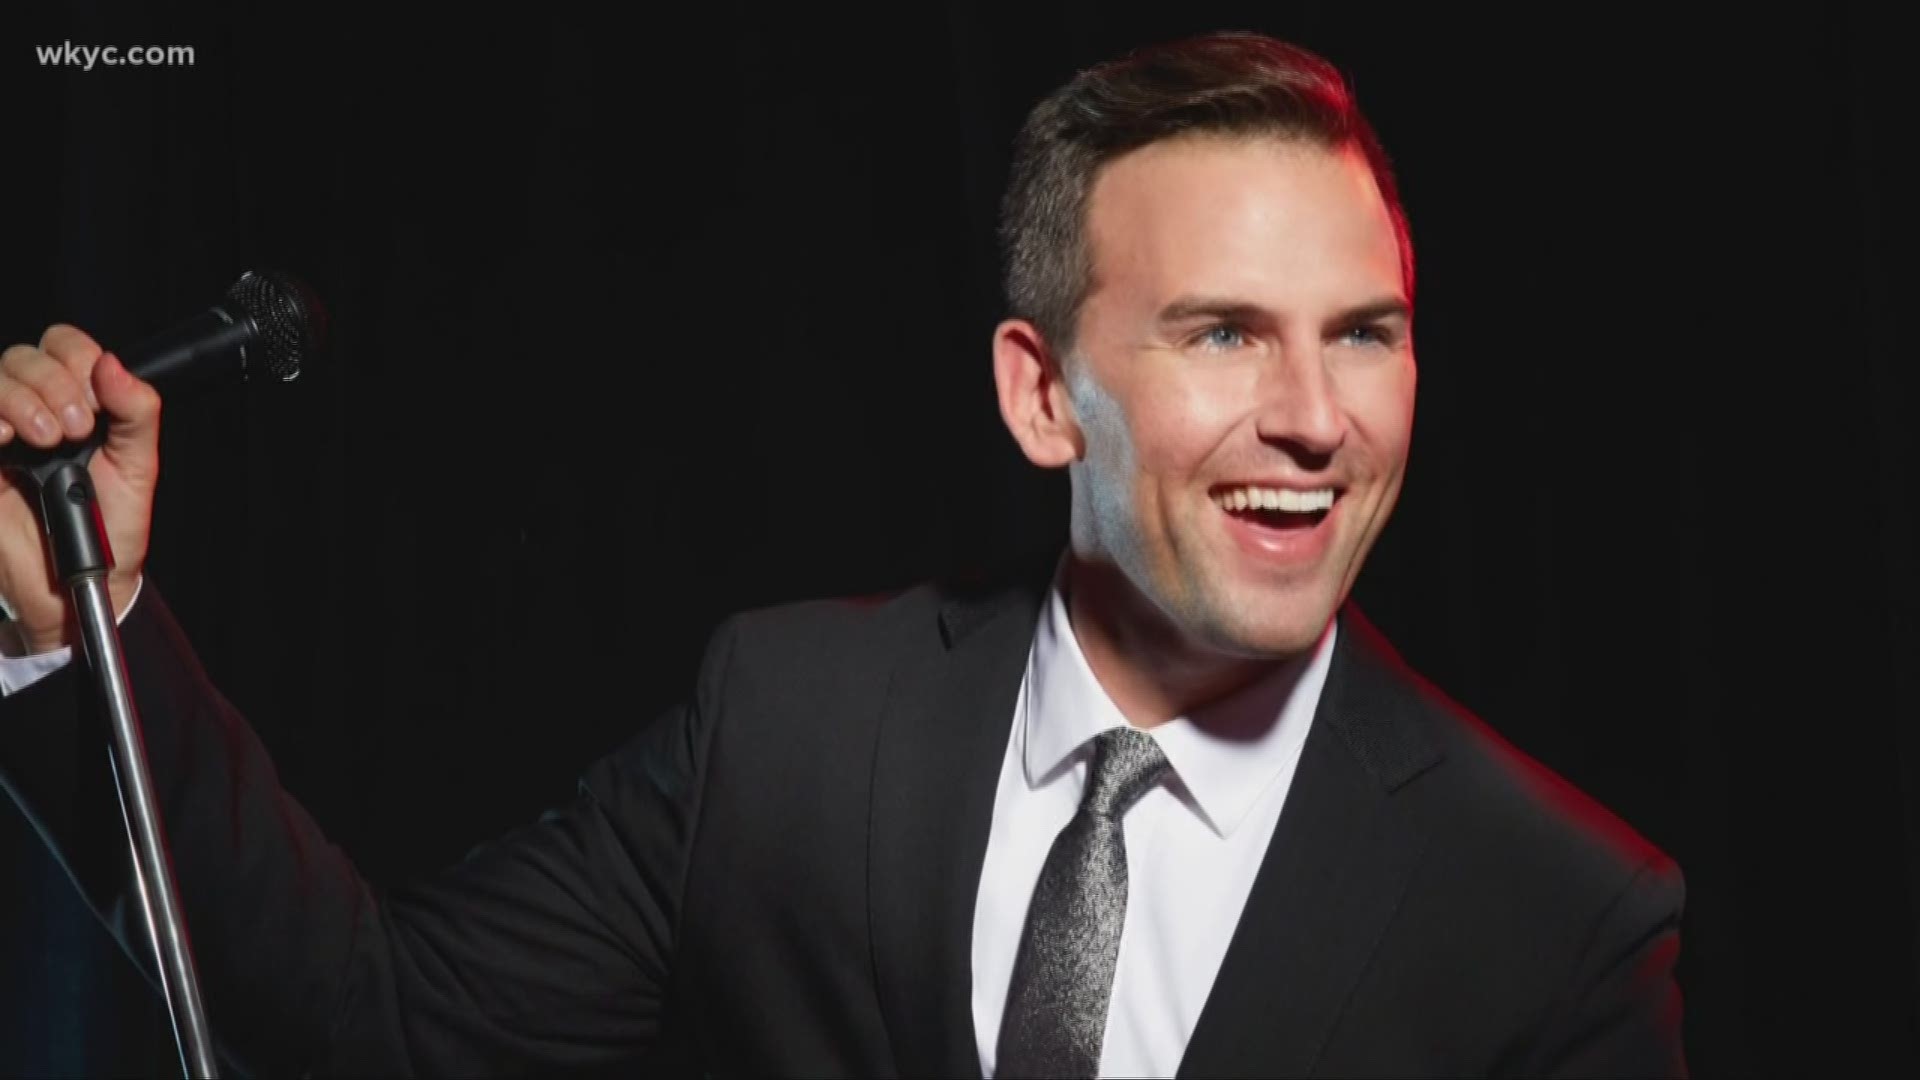 Jan. 24, 2020: Daniel Reichard was always destined to be an entertainer. Now, the Broadway star best known for his 'Jersey Boys' role, is back in Northeast Ohio.